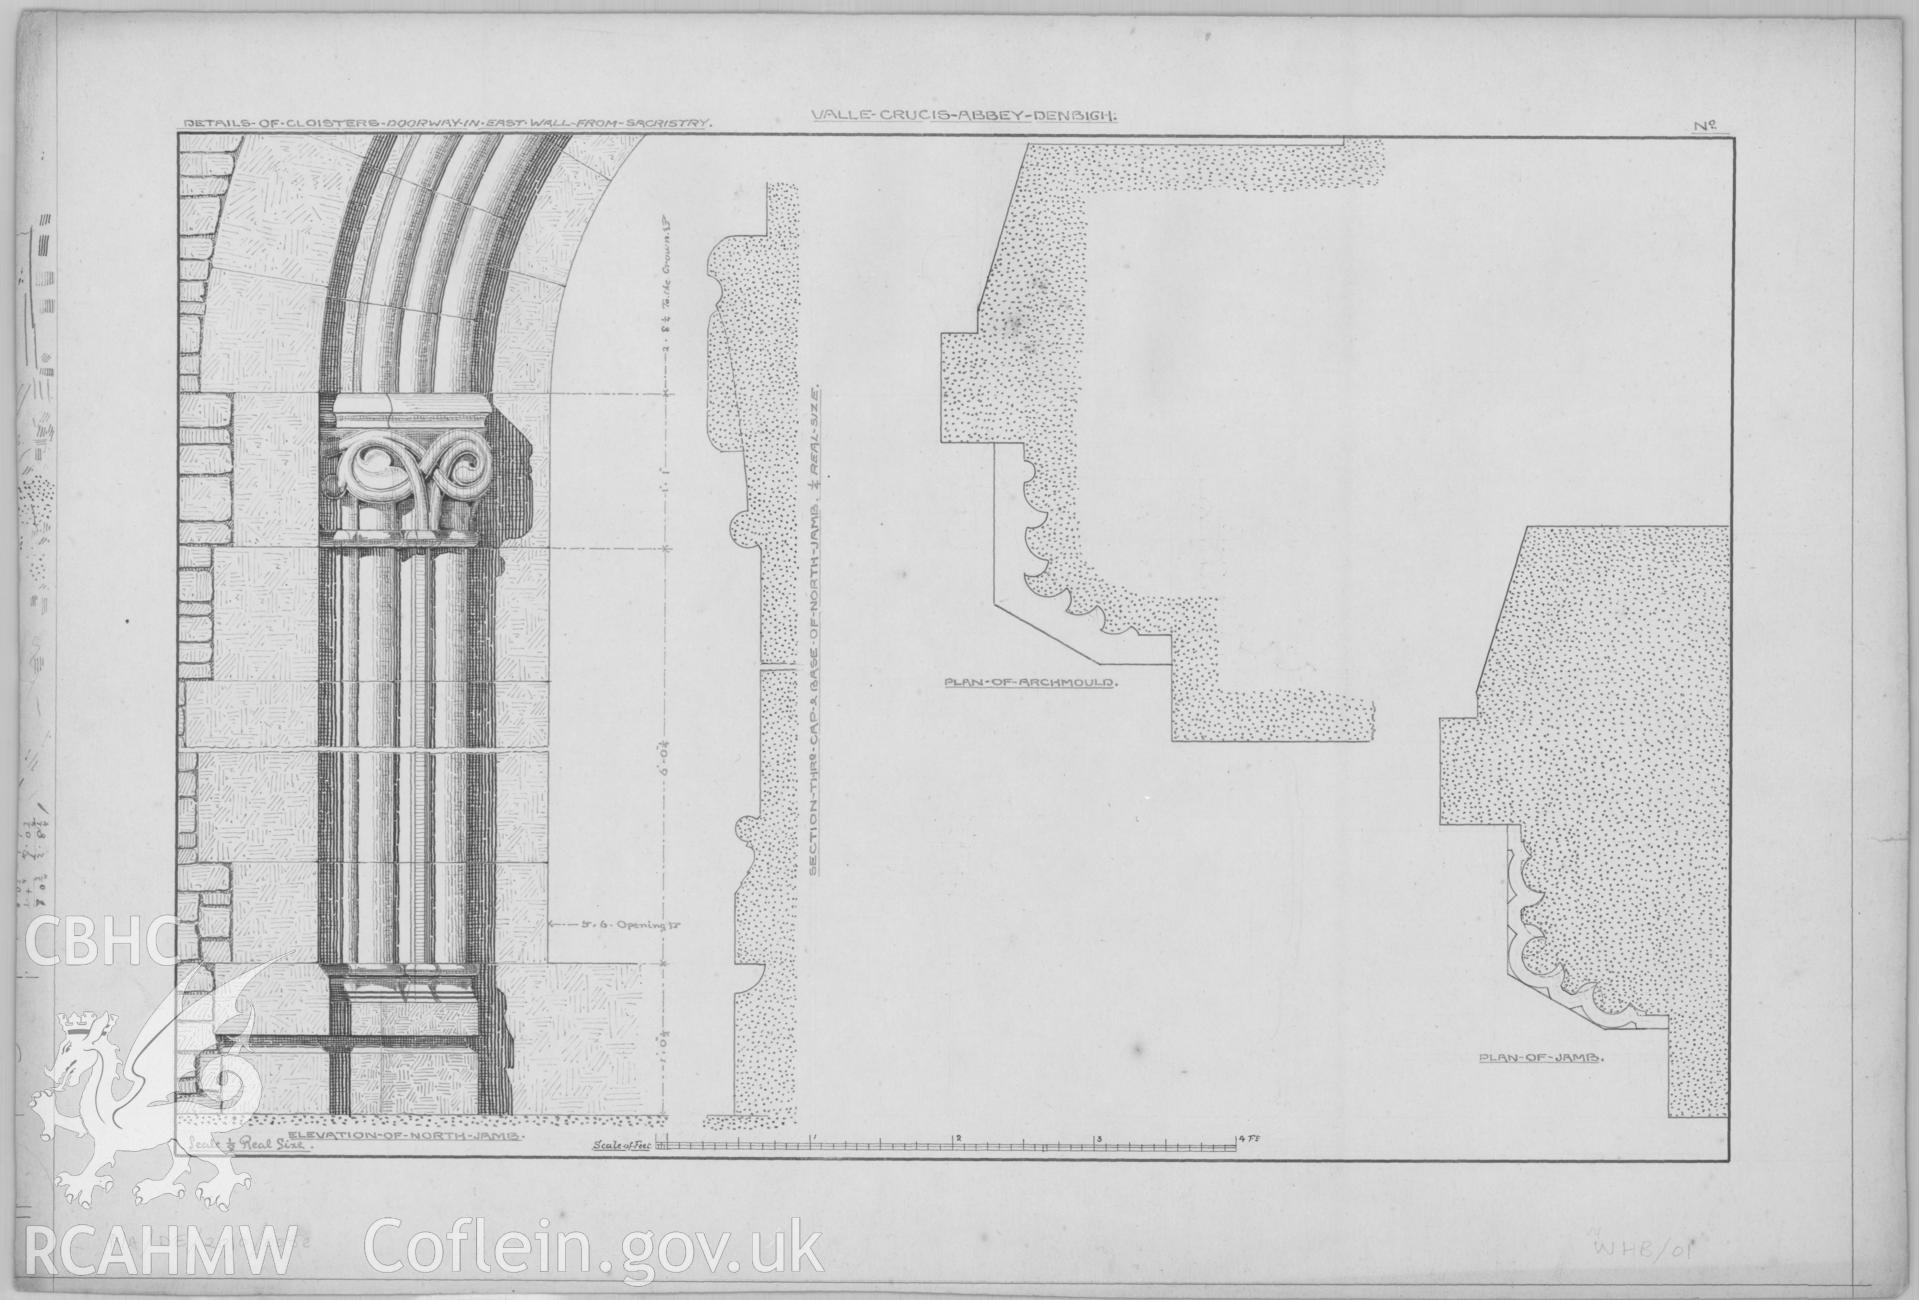 Original architectural drawing in pencil and ink showing details of the cloisters doorway in the east wall from the sacristry at Valle Crucis Abbey. Produced by Hayward Brakspear and Sons in 1886.